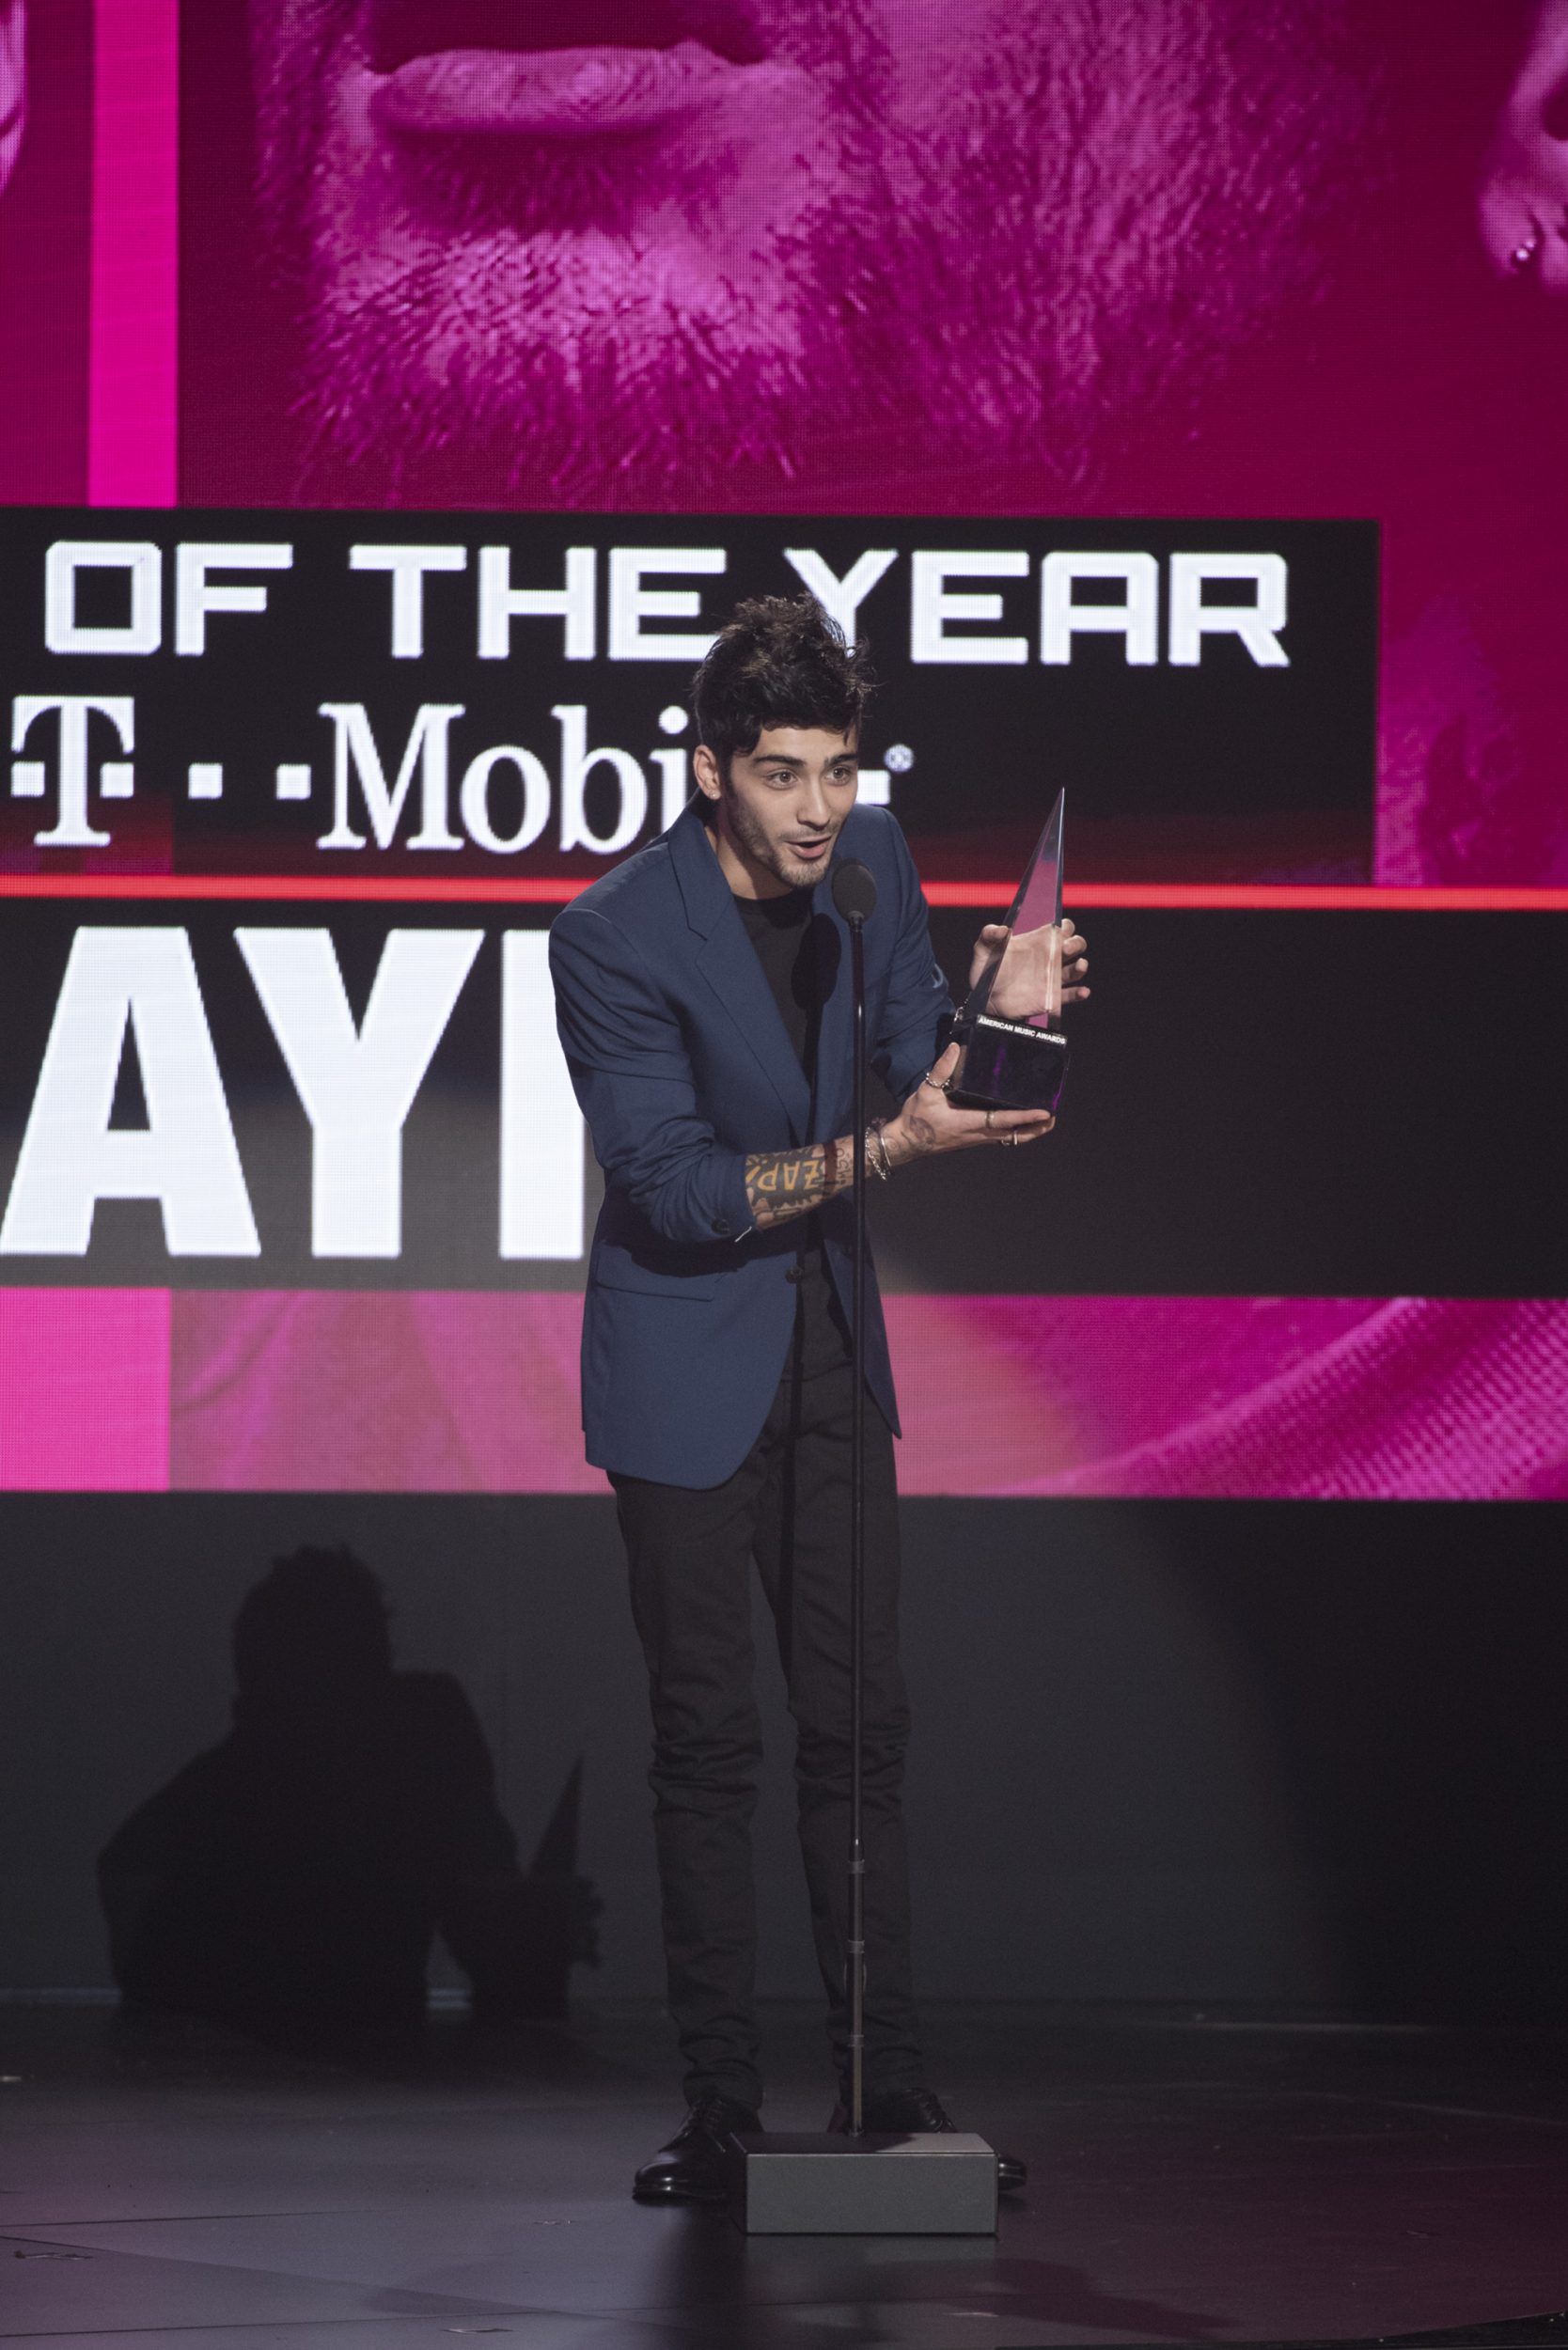 THE 2016 AMERICAN MUSIC AWARDS(r) - The “2016 American Music Awards,” the world’s biggest fan-voted award show, broadcasts live from the Microsoft Theater in Los Angeles on SUNDAY, NOVEMBER 20, at 8:00 p.m. EST, on ABC. (Image Group LA/ABC) ZAYN